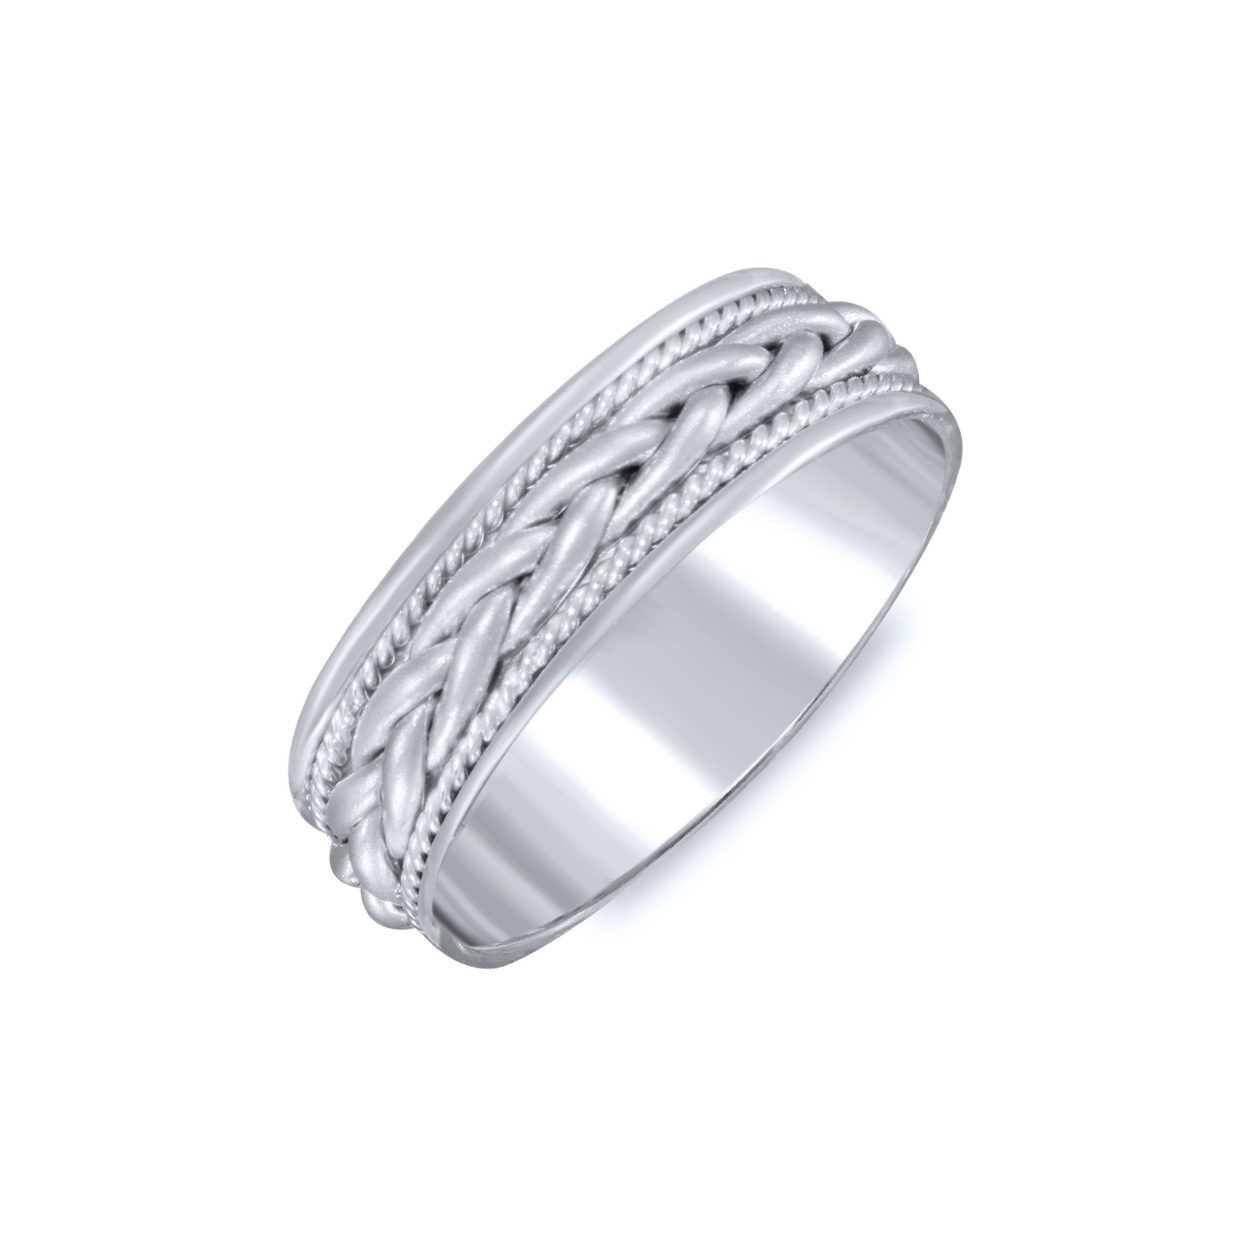 Wide Braided Woven Wedding Band. 7mm